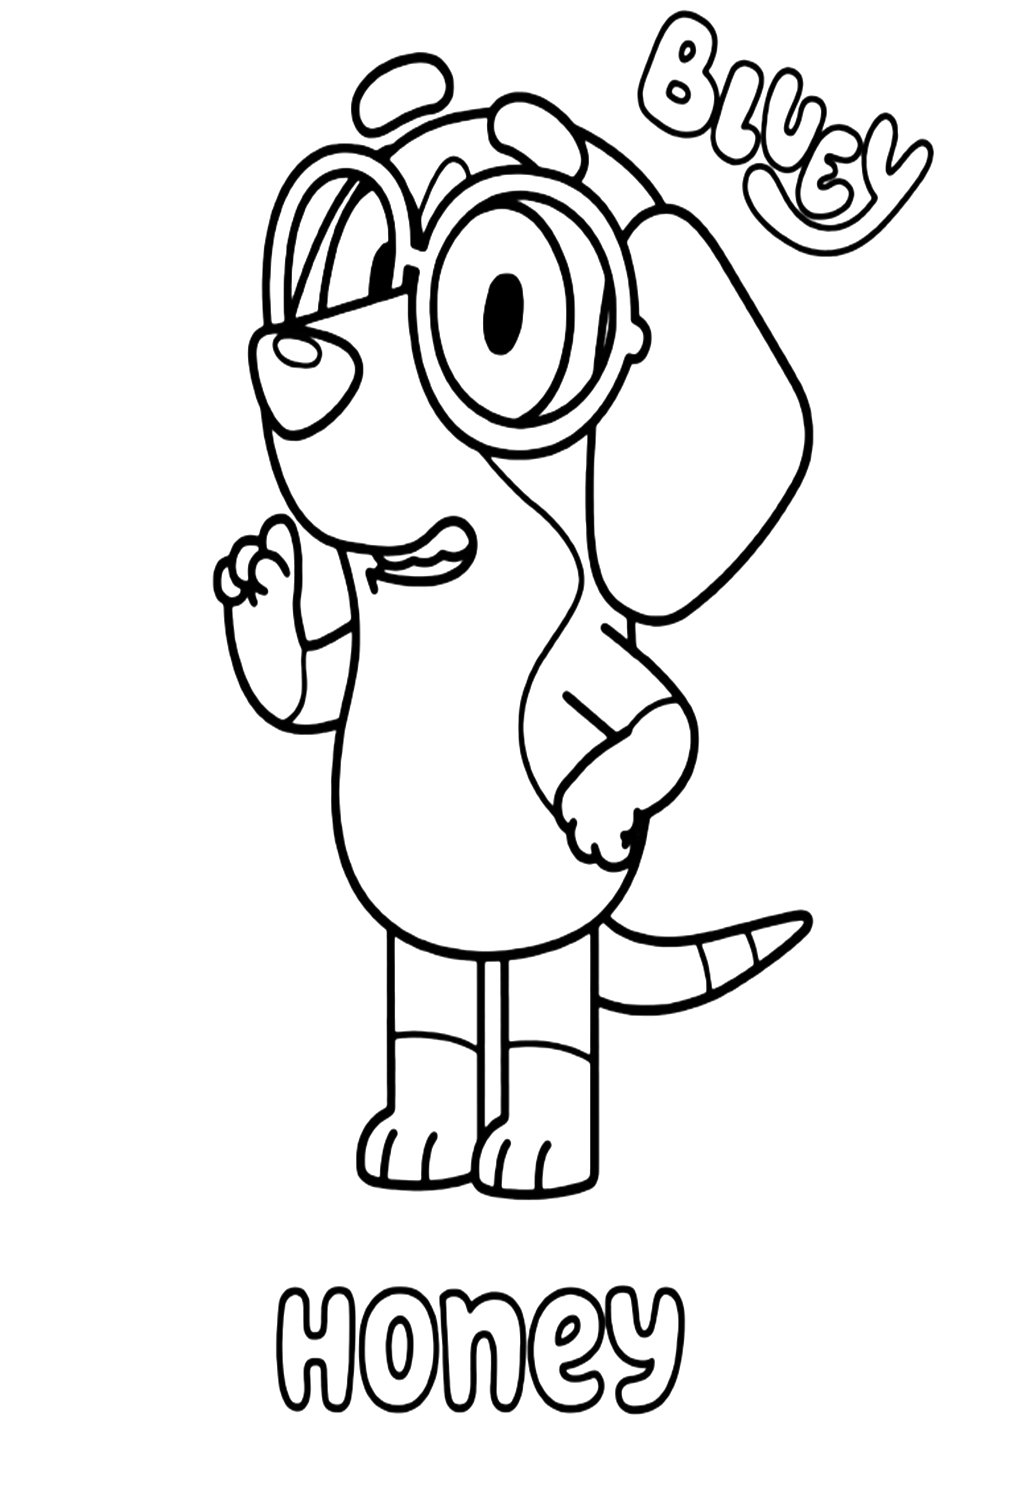 Honey Coloring Page